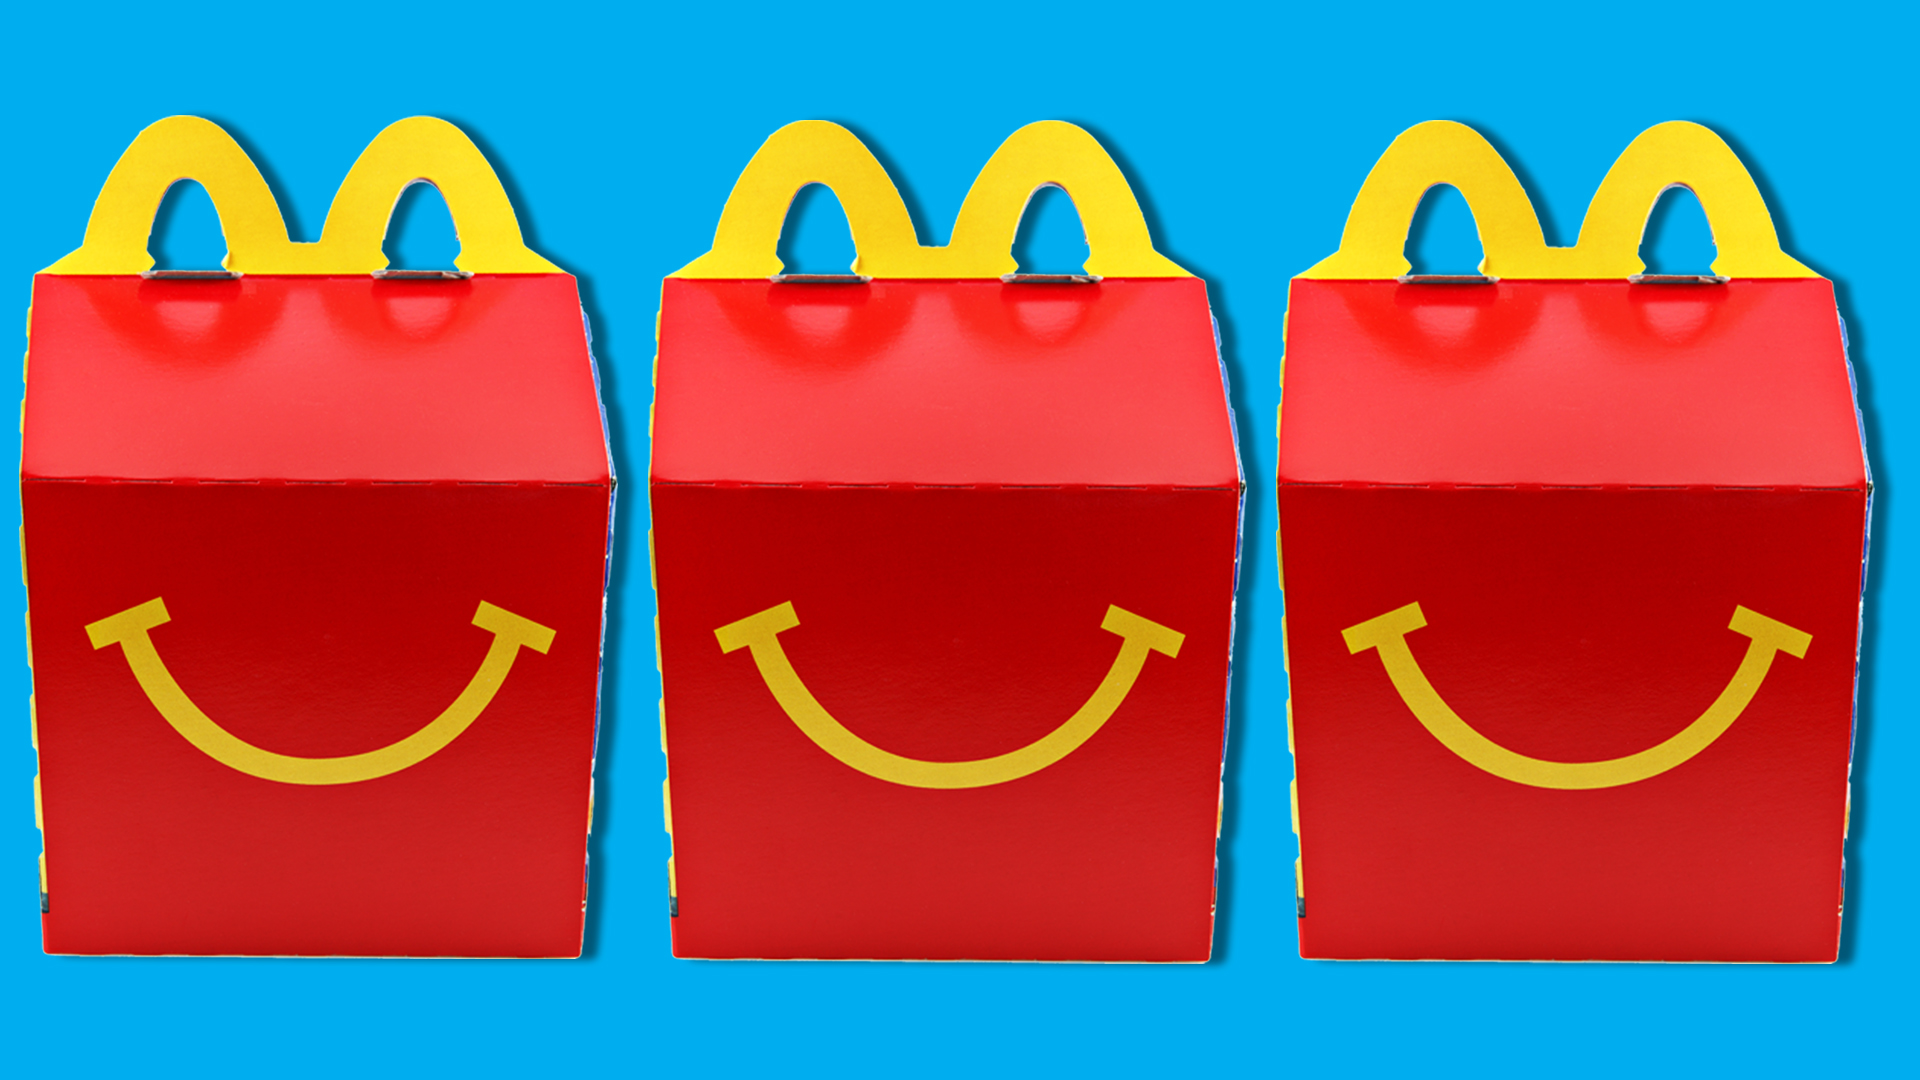 Mcdonalds clipart kid meal, Mcdonalds kid meal Transparent FREE for